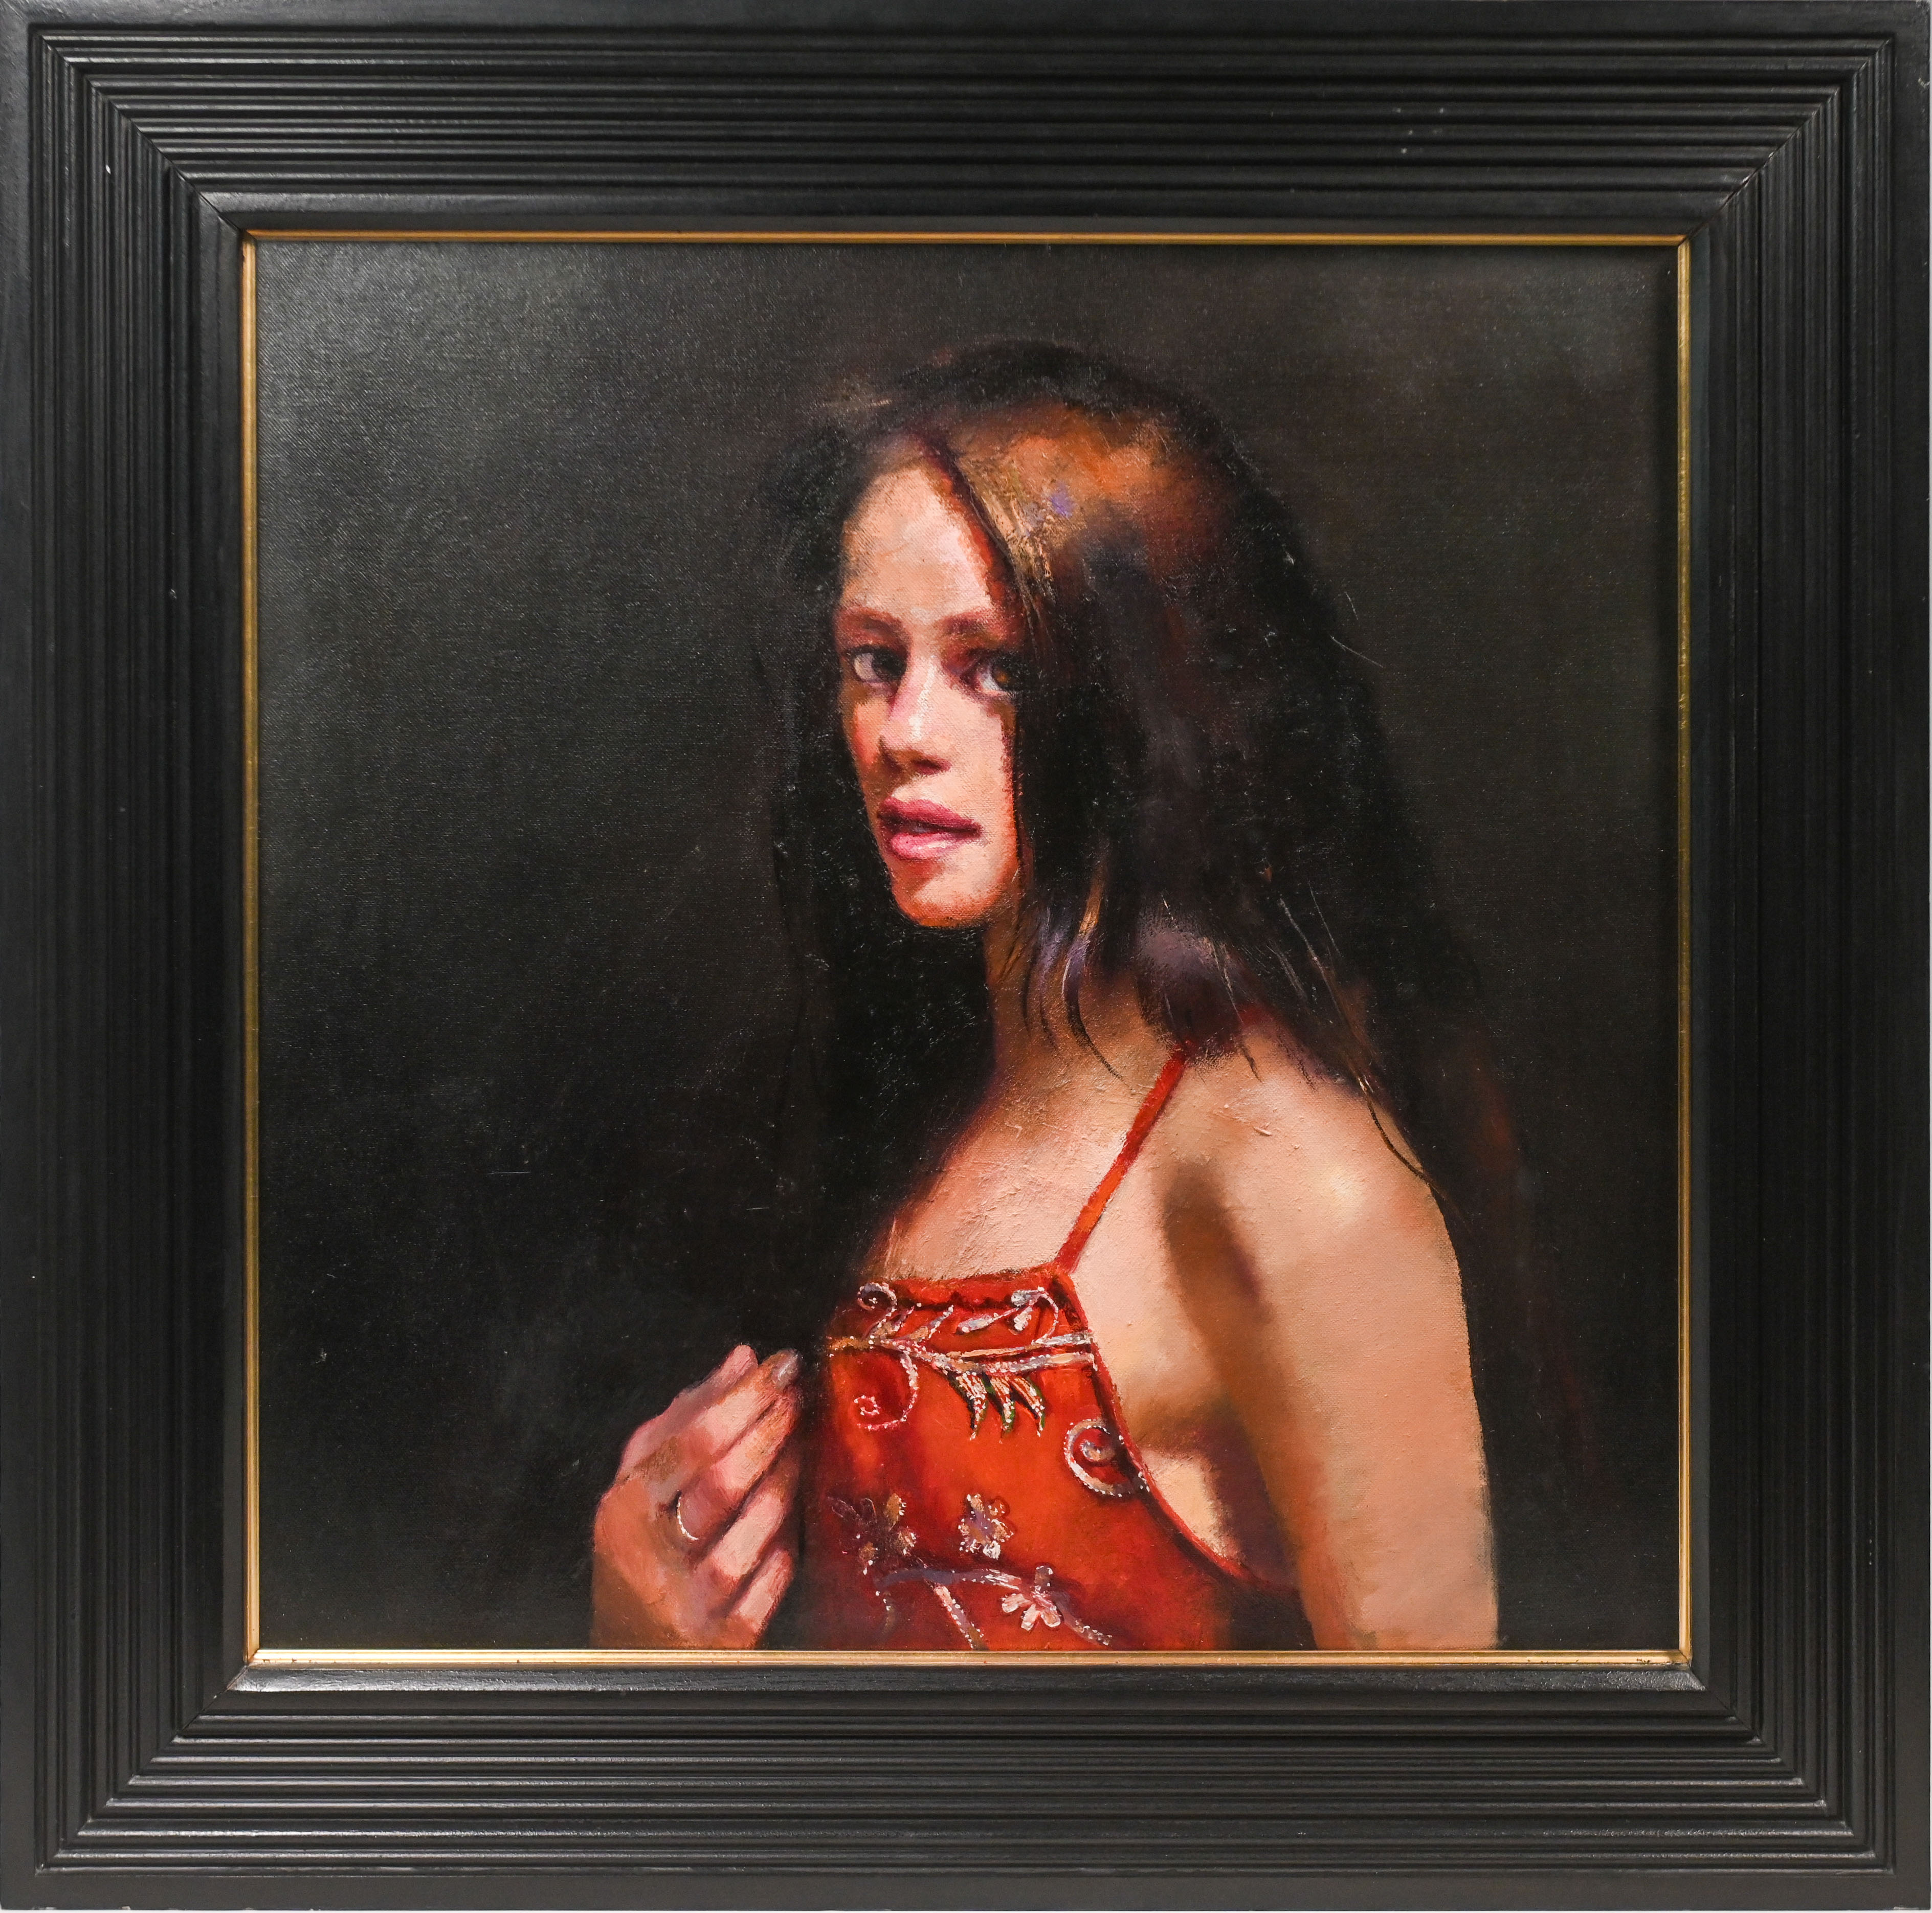 Robert Lenkiewicz (1941-2002) oil on canvas, signed twice and titled on reverse